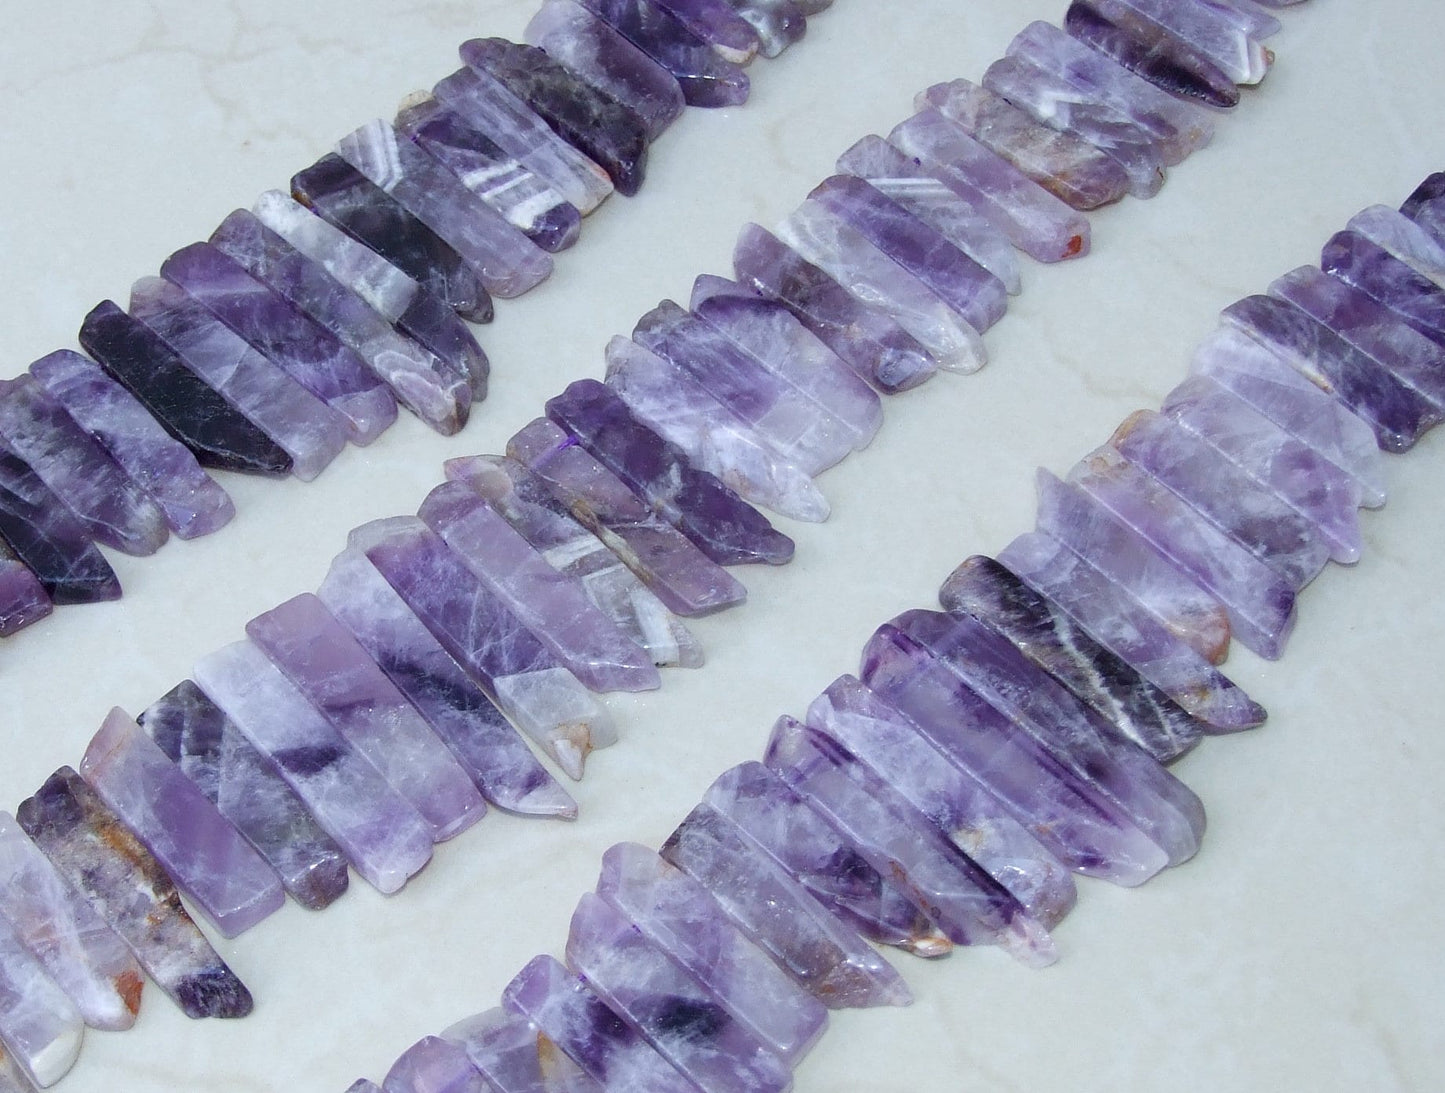 Amethyst Beads, Polished Natural Amethyst Slice, Amethyst Pendants, Gemstone Beads, Amethyst Points Jewelry, Half Strand - 25mm to 50mm - A4